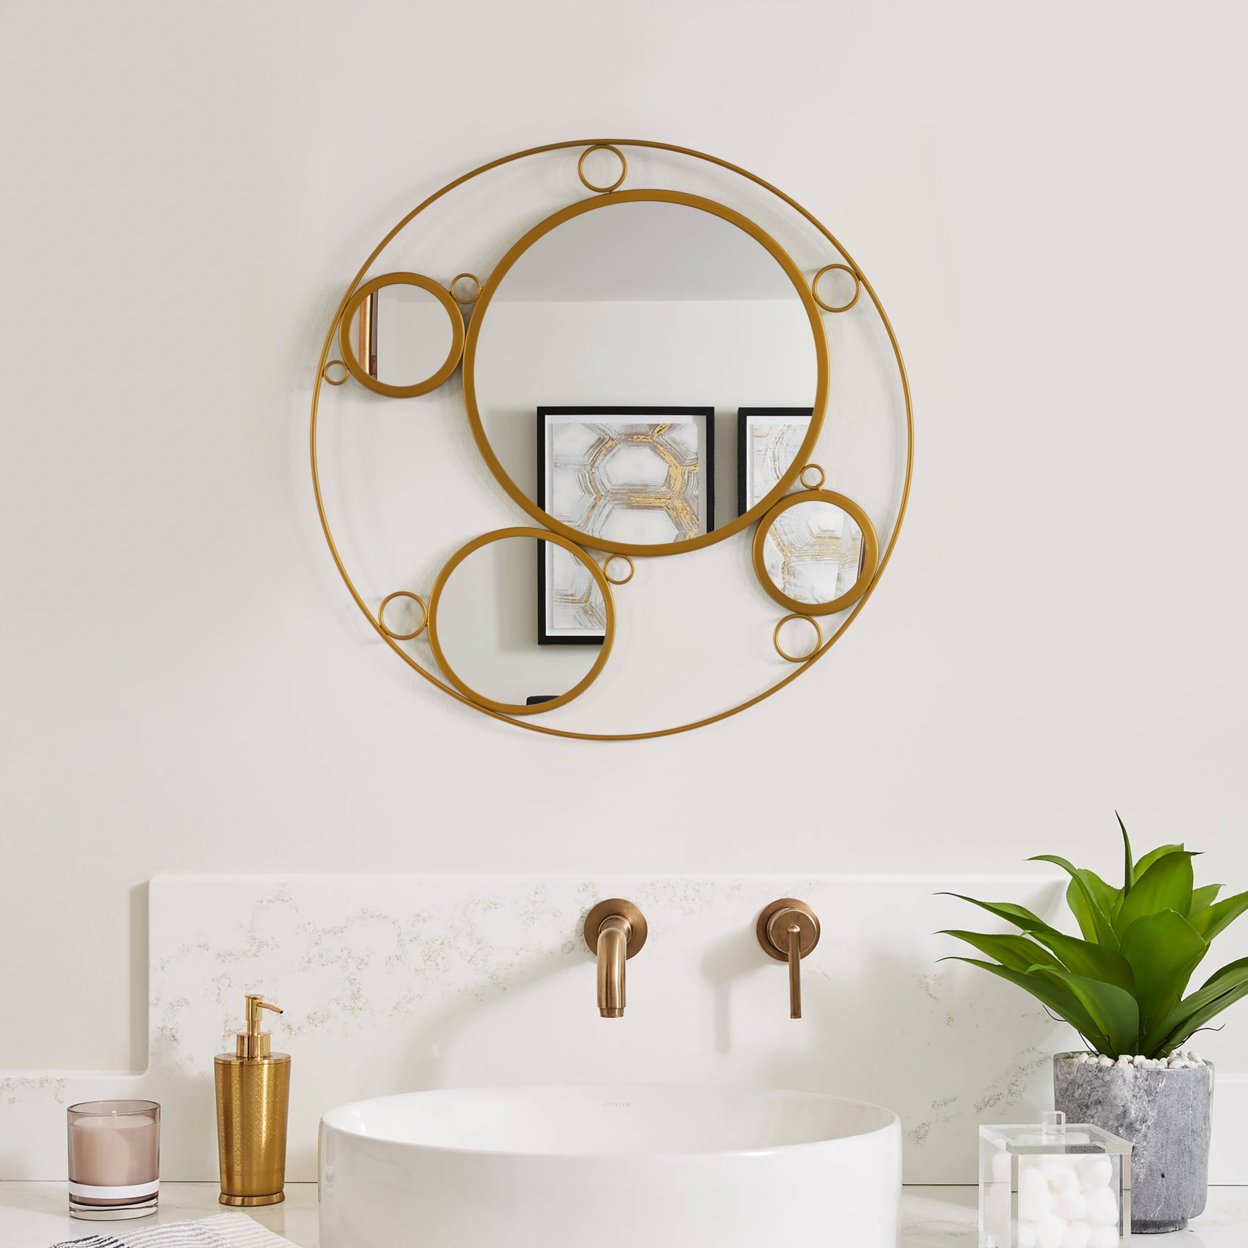 Decorative Round Frame Gold Metal Wall Mounted Modern Mirror With 4 Glass Mirror Balls - Gold Round